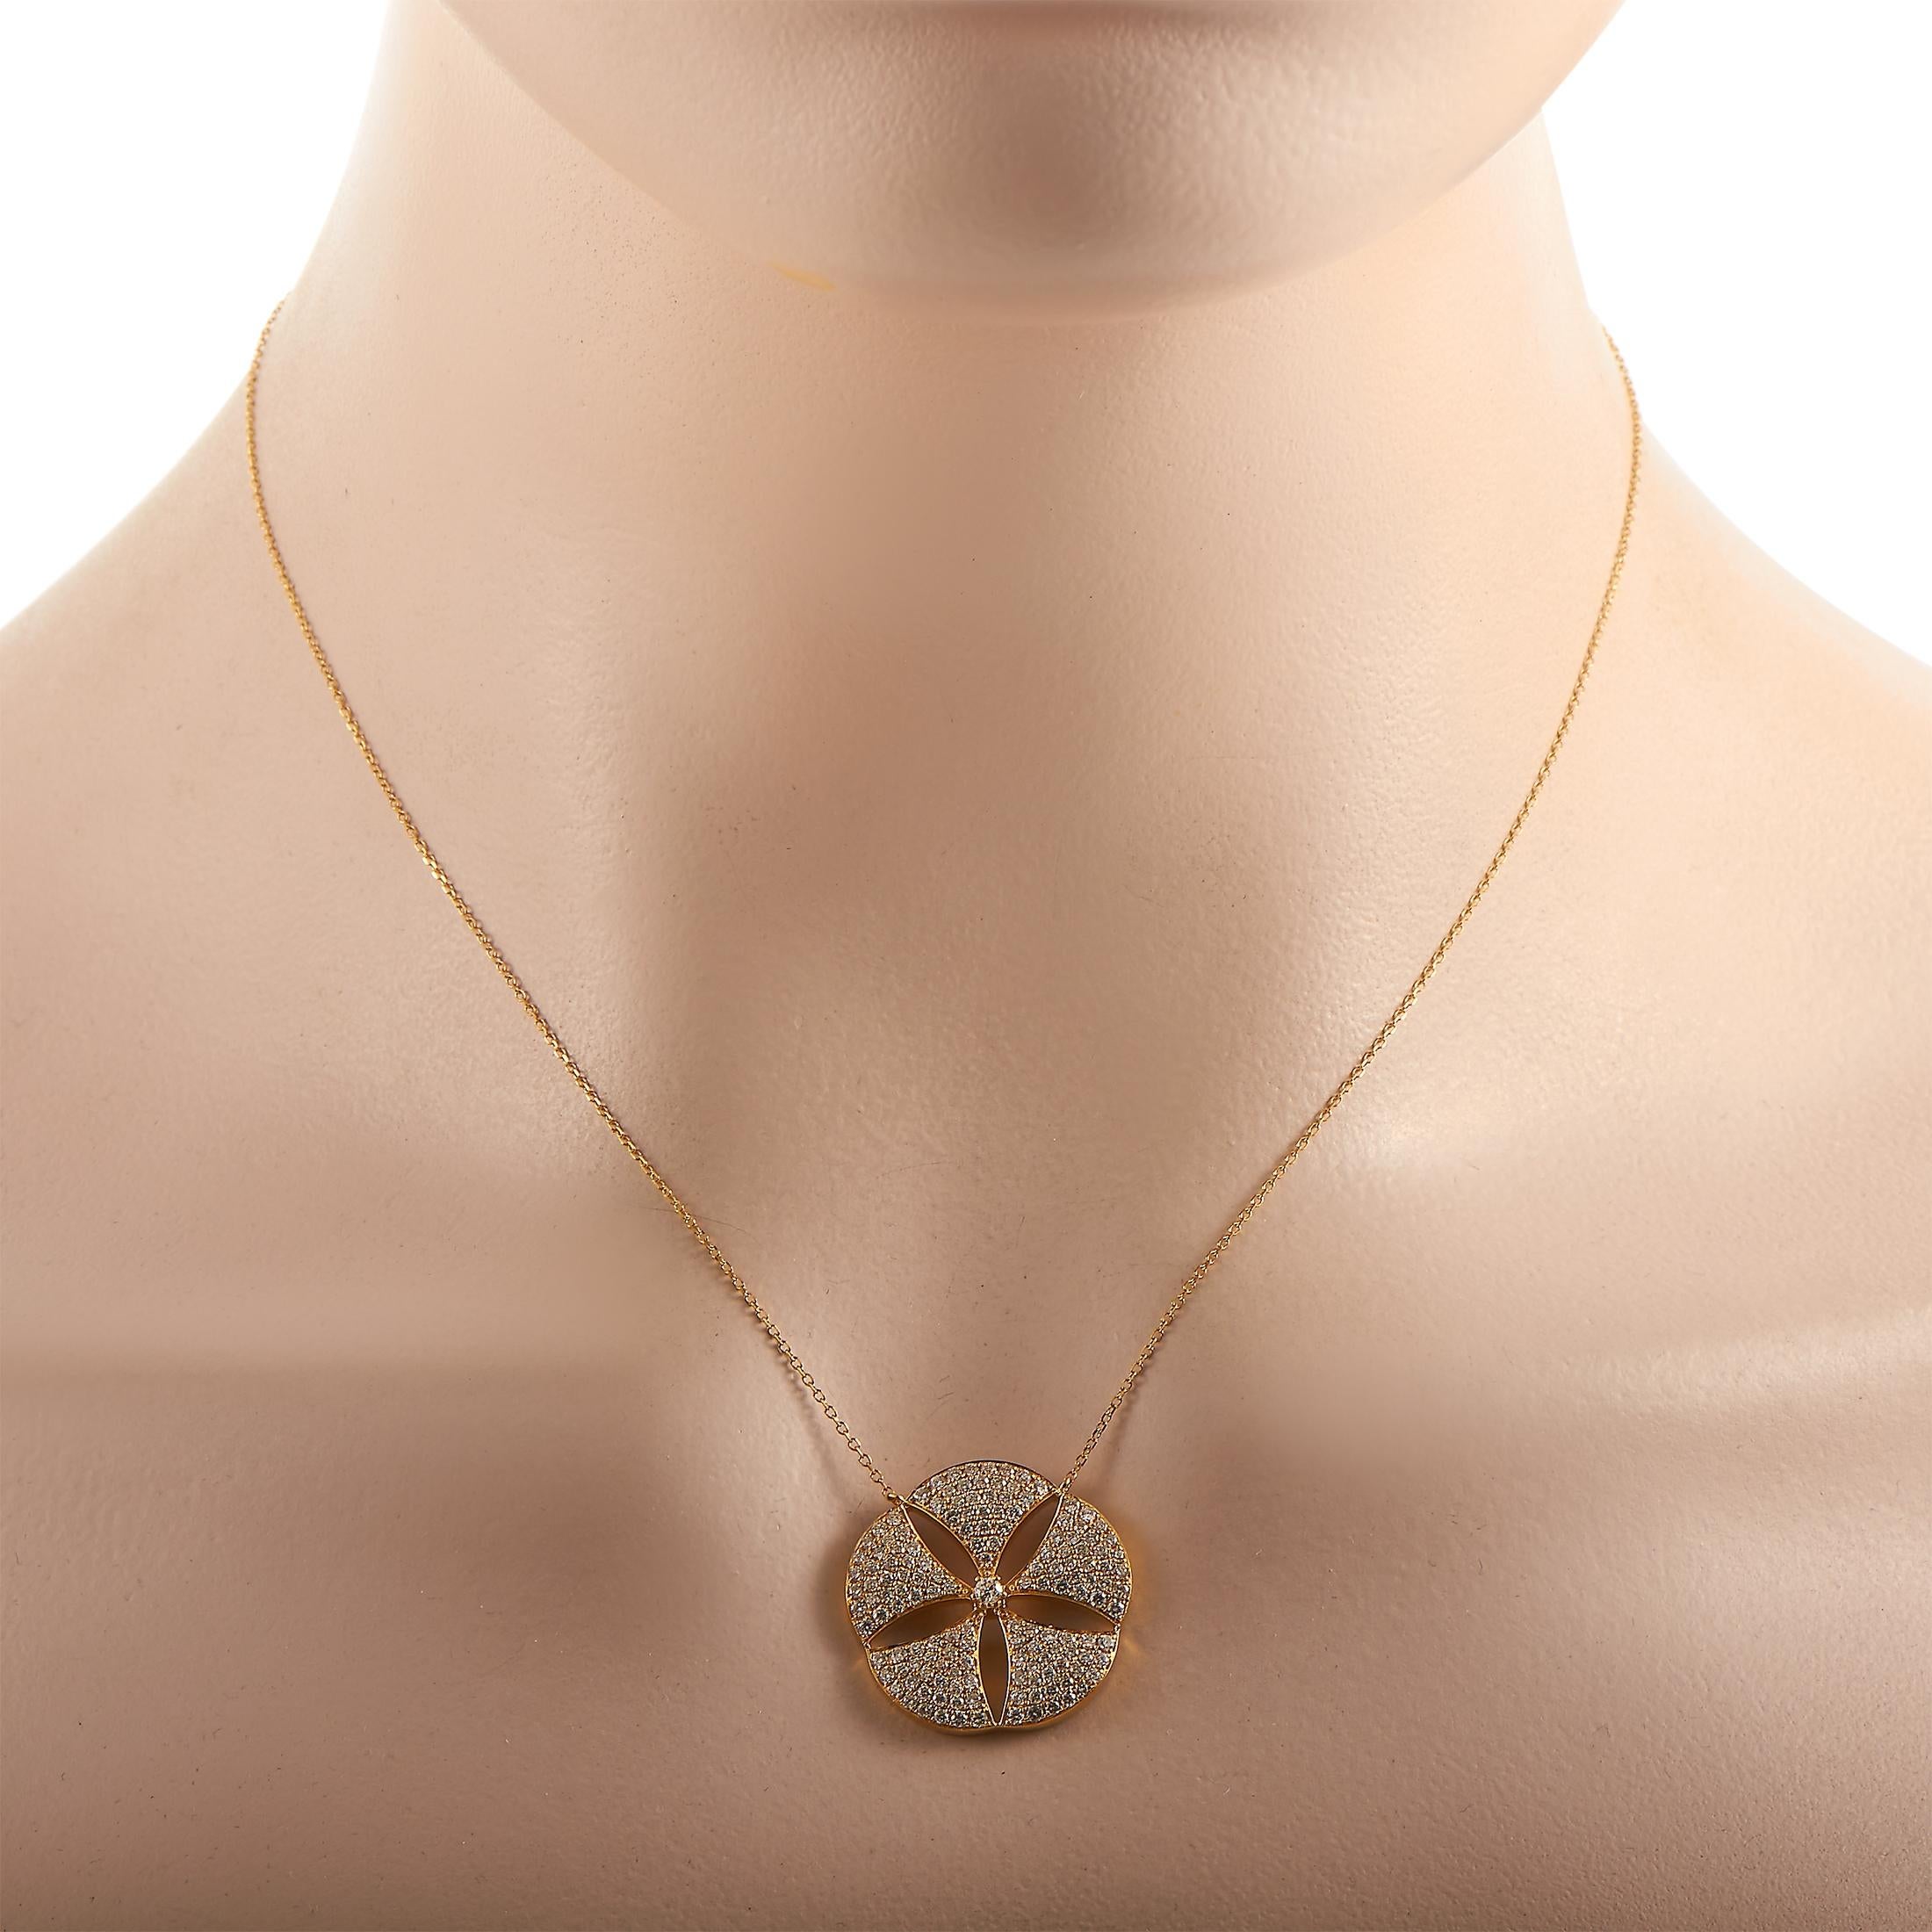 This LB Exclusive necklace is crafted from 18K yellow gold and weighs 8.2 grams. It is presented with a 16” chain and a pendant that measures 1” in length and 1” in width. The necklace is embellished with diamonds that total 1.30 carats.
 
